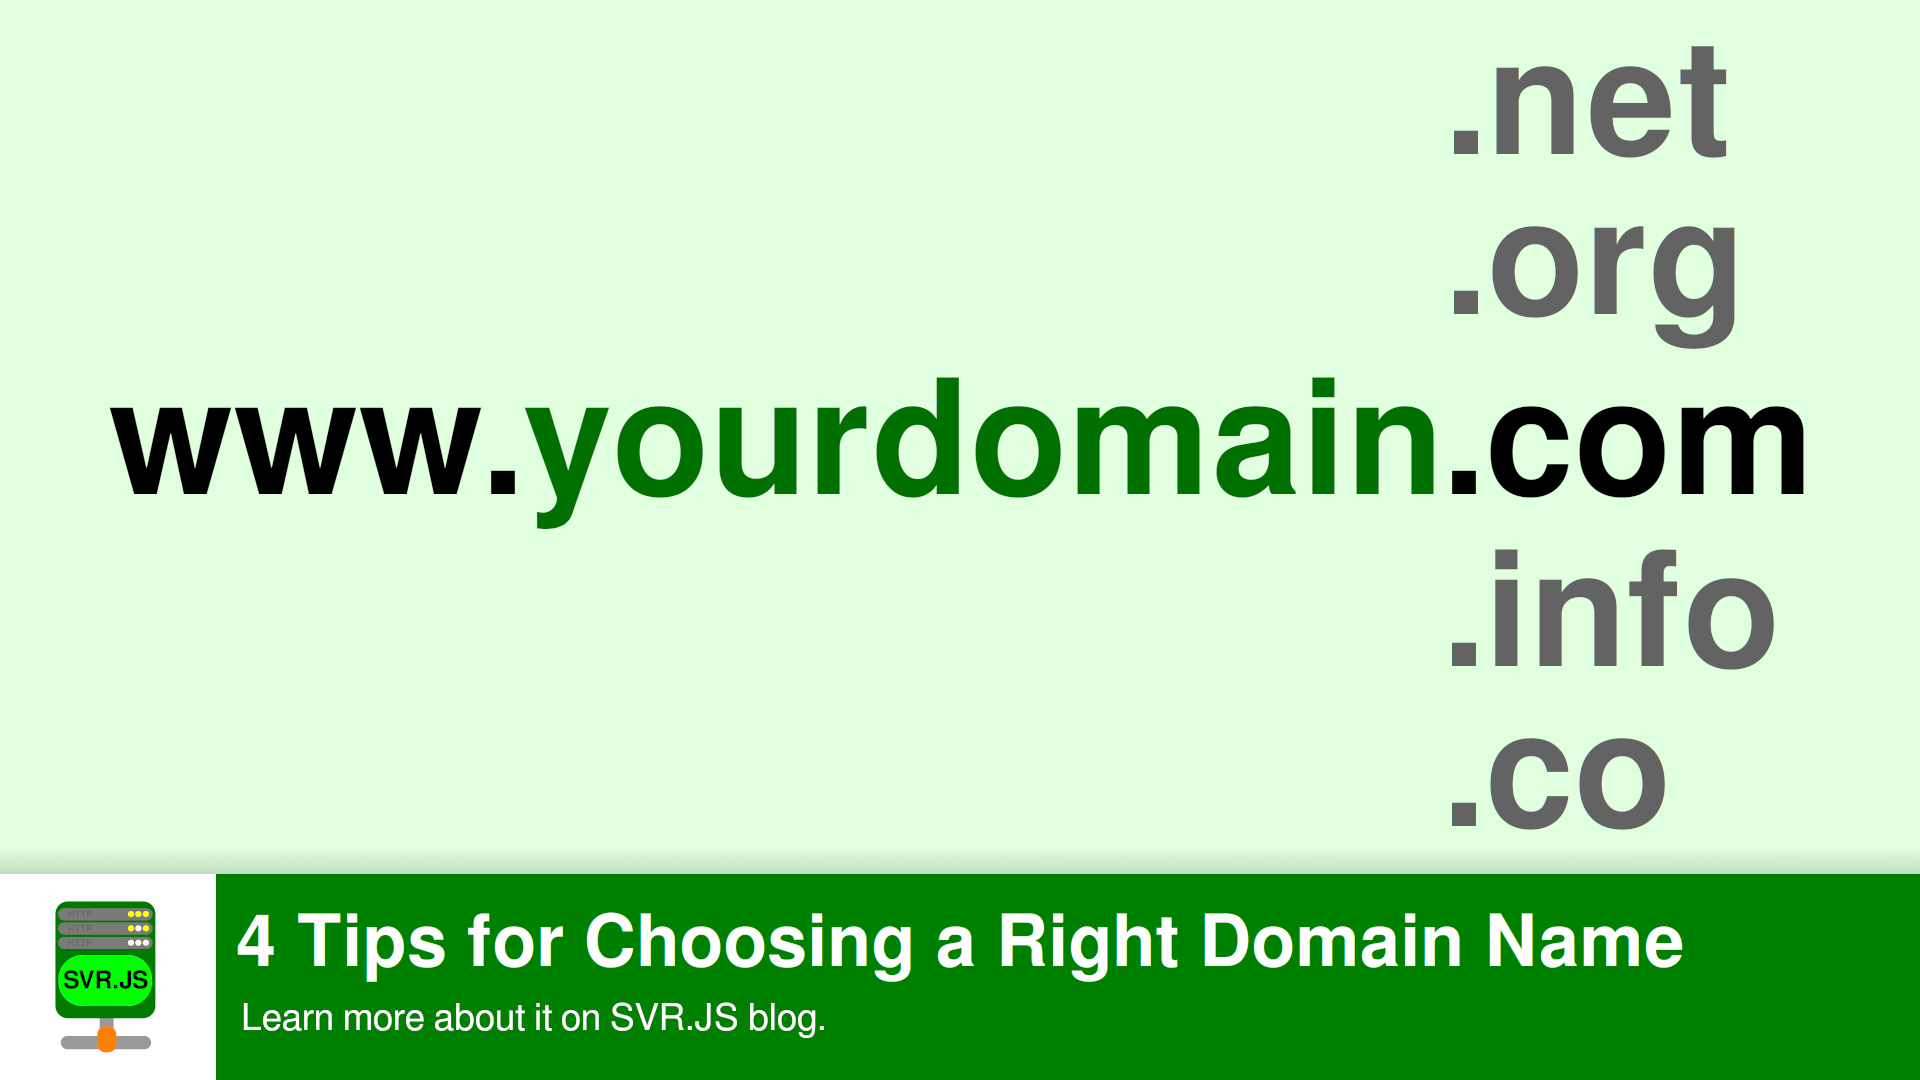 4 Tips for Choosing a Right Domain Name